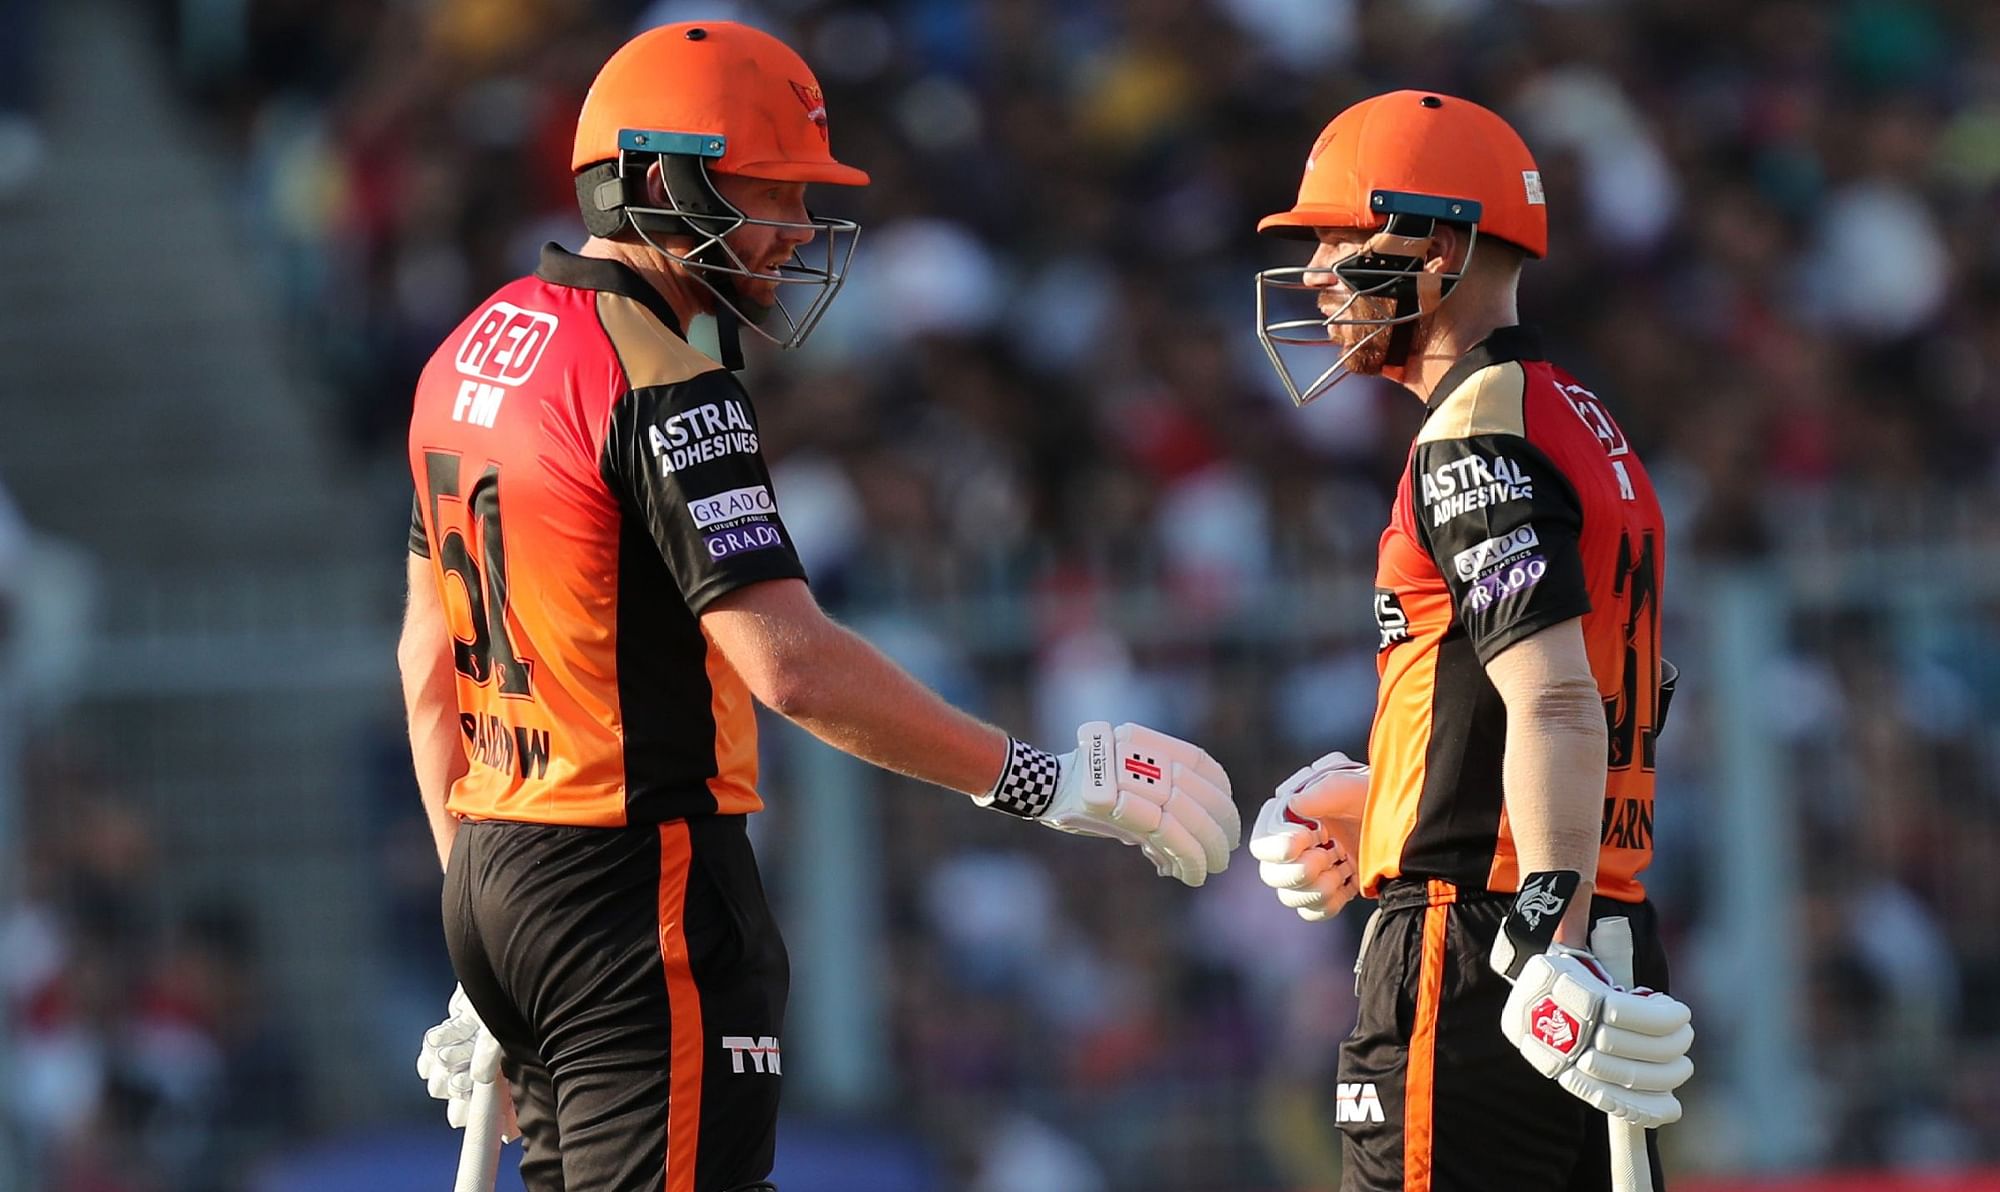 Jonny Bairstow (445) and David Warner (611) were absolutely sensational for the Sunrisers Hyderabad.